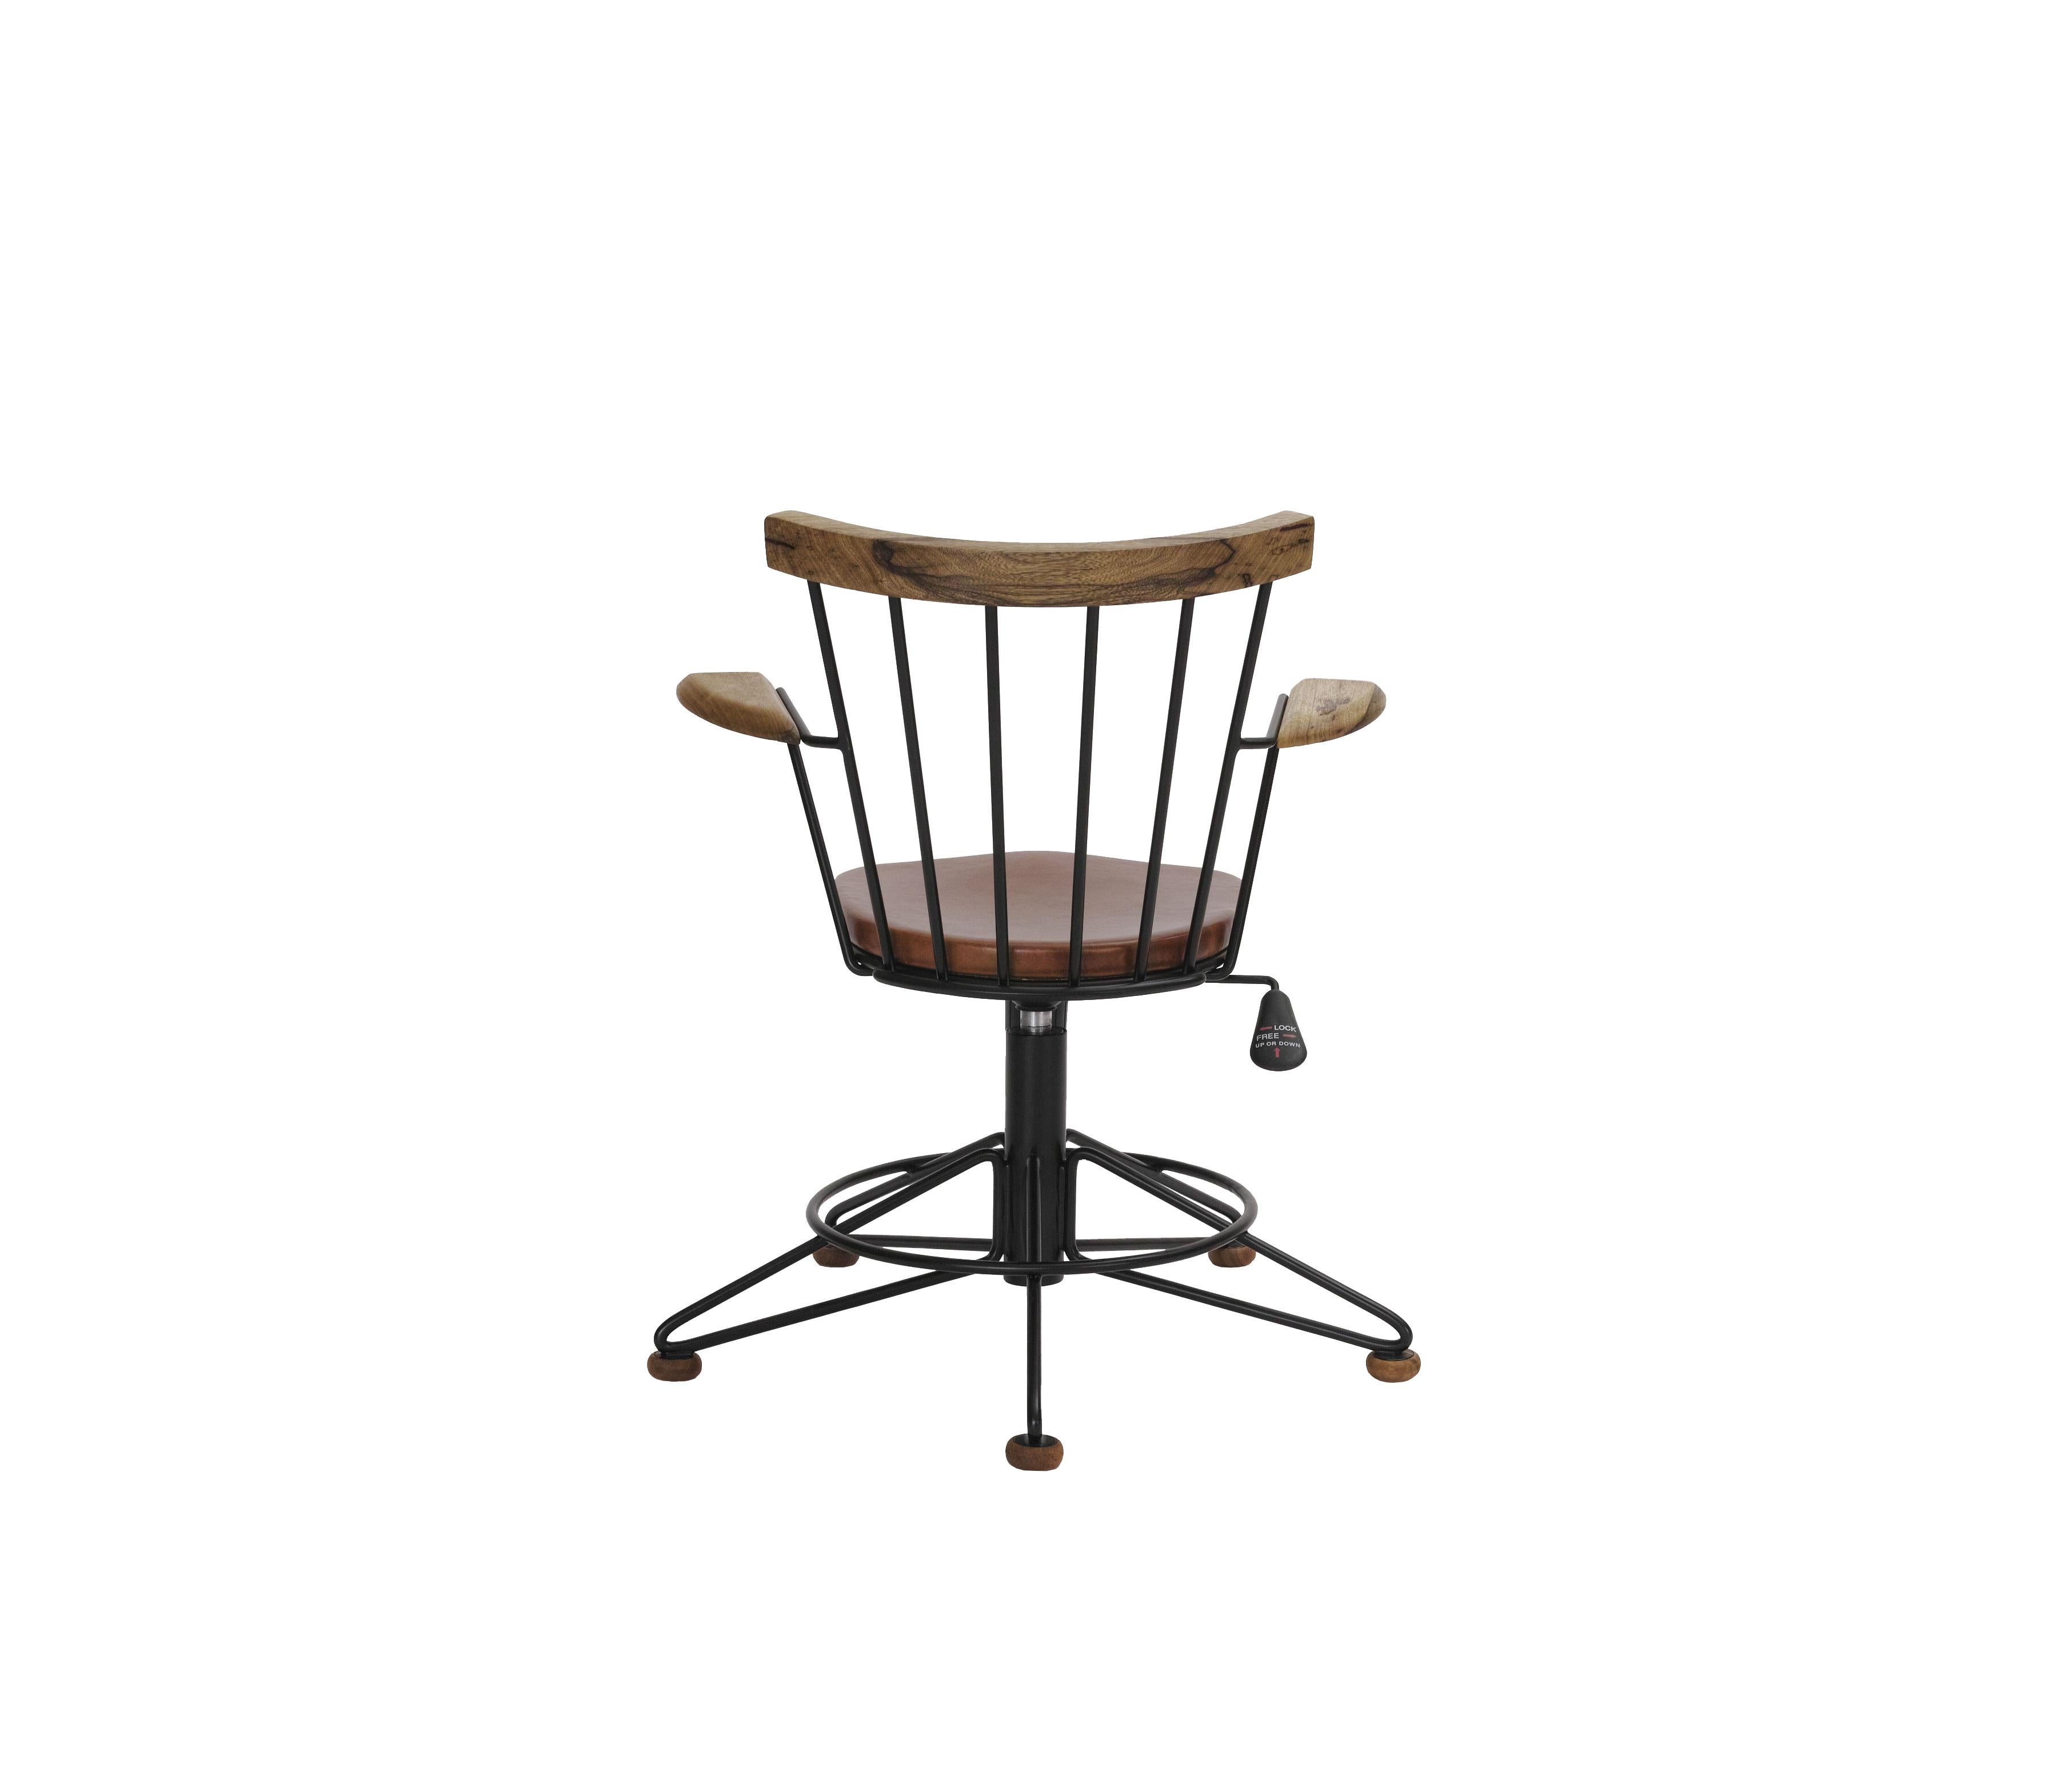 The Rocket Chairs is an industrial desk chair that combines a solid steel frame with solid wooden feet, arched wooden back, wooden elbow support, and a shaped solid wood leather-upholstered padded seat, all supported on a hand bent solid steel